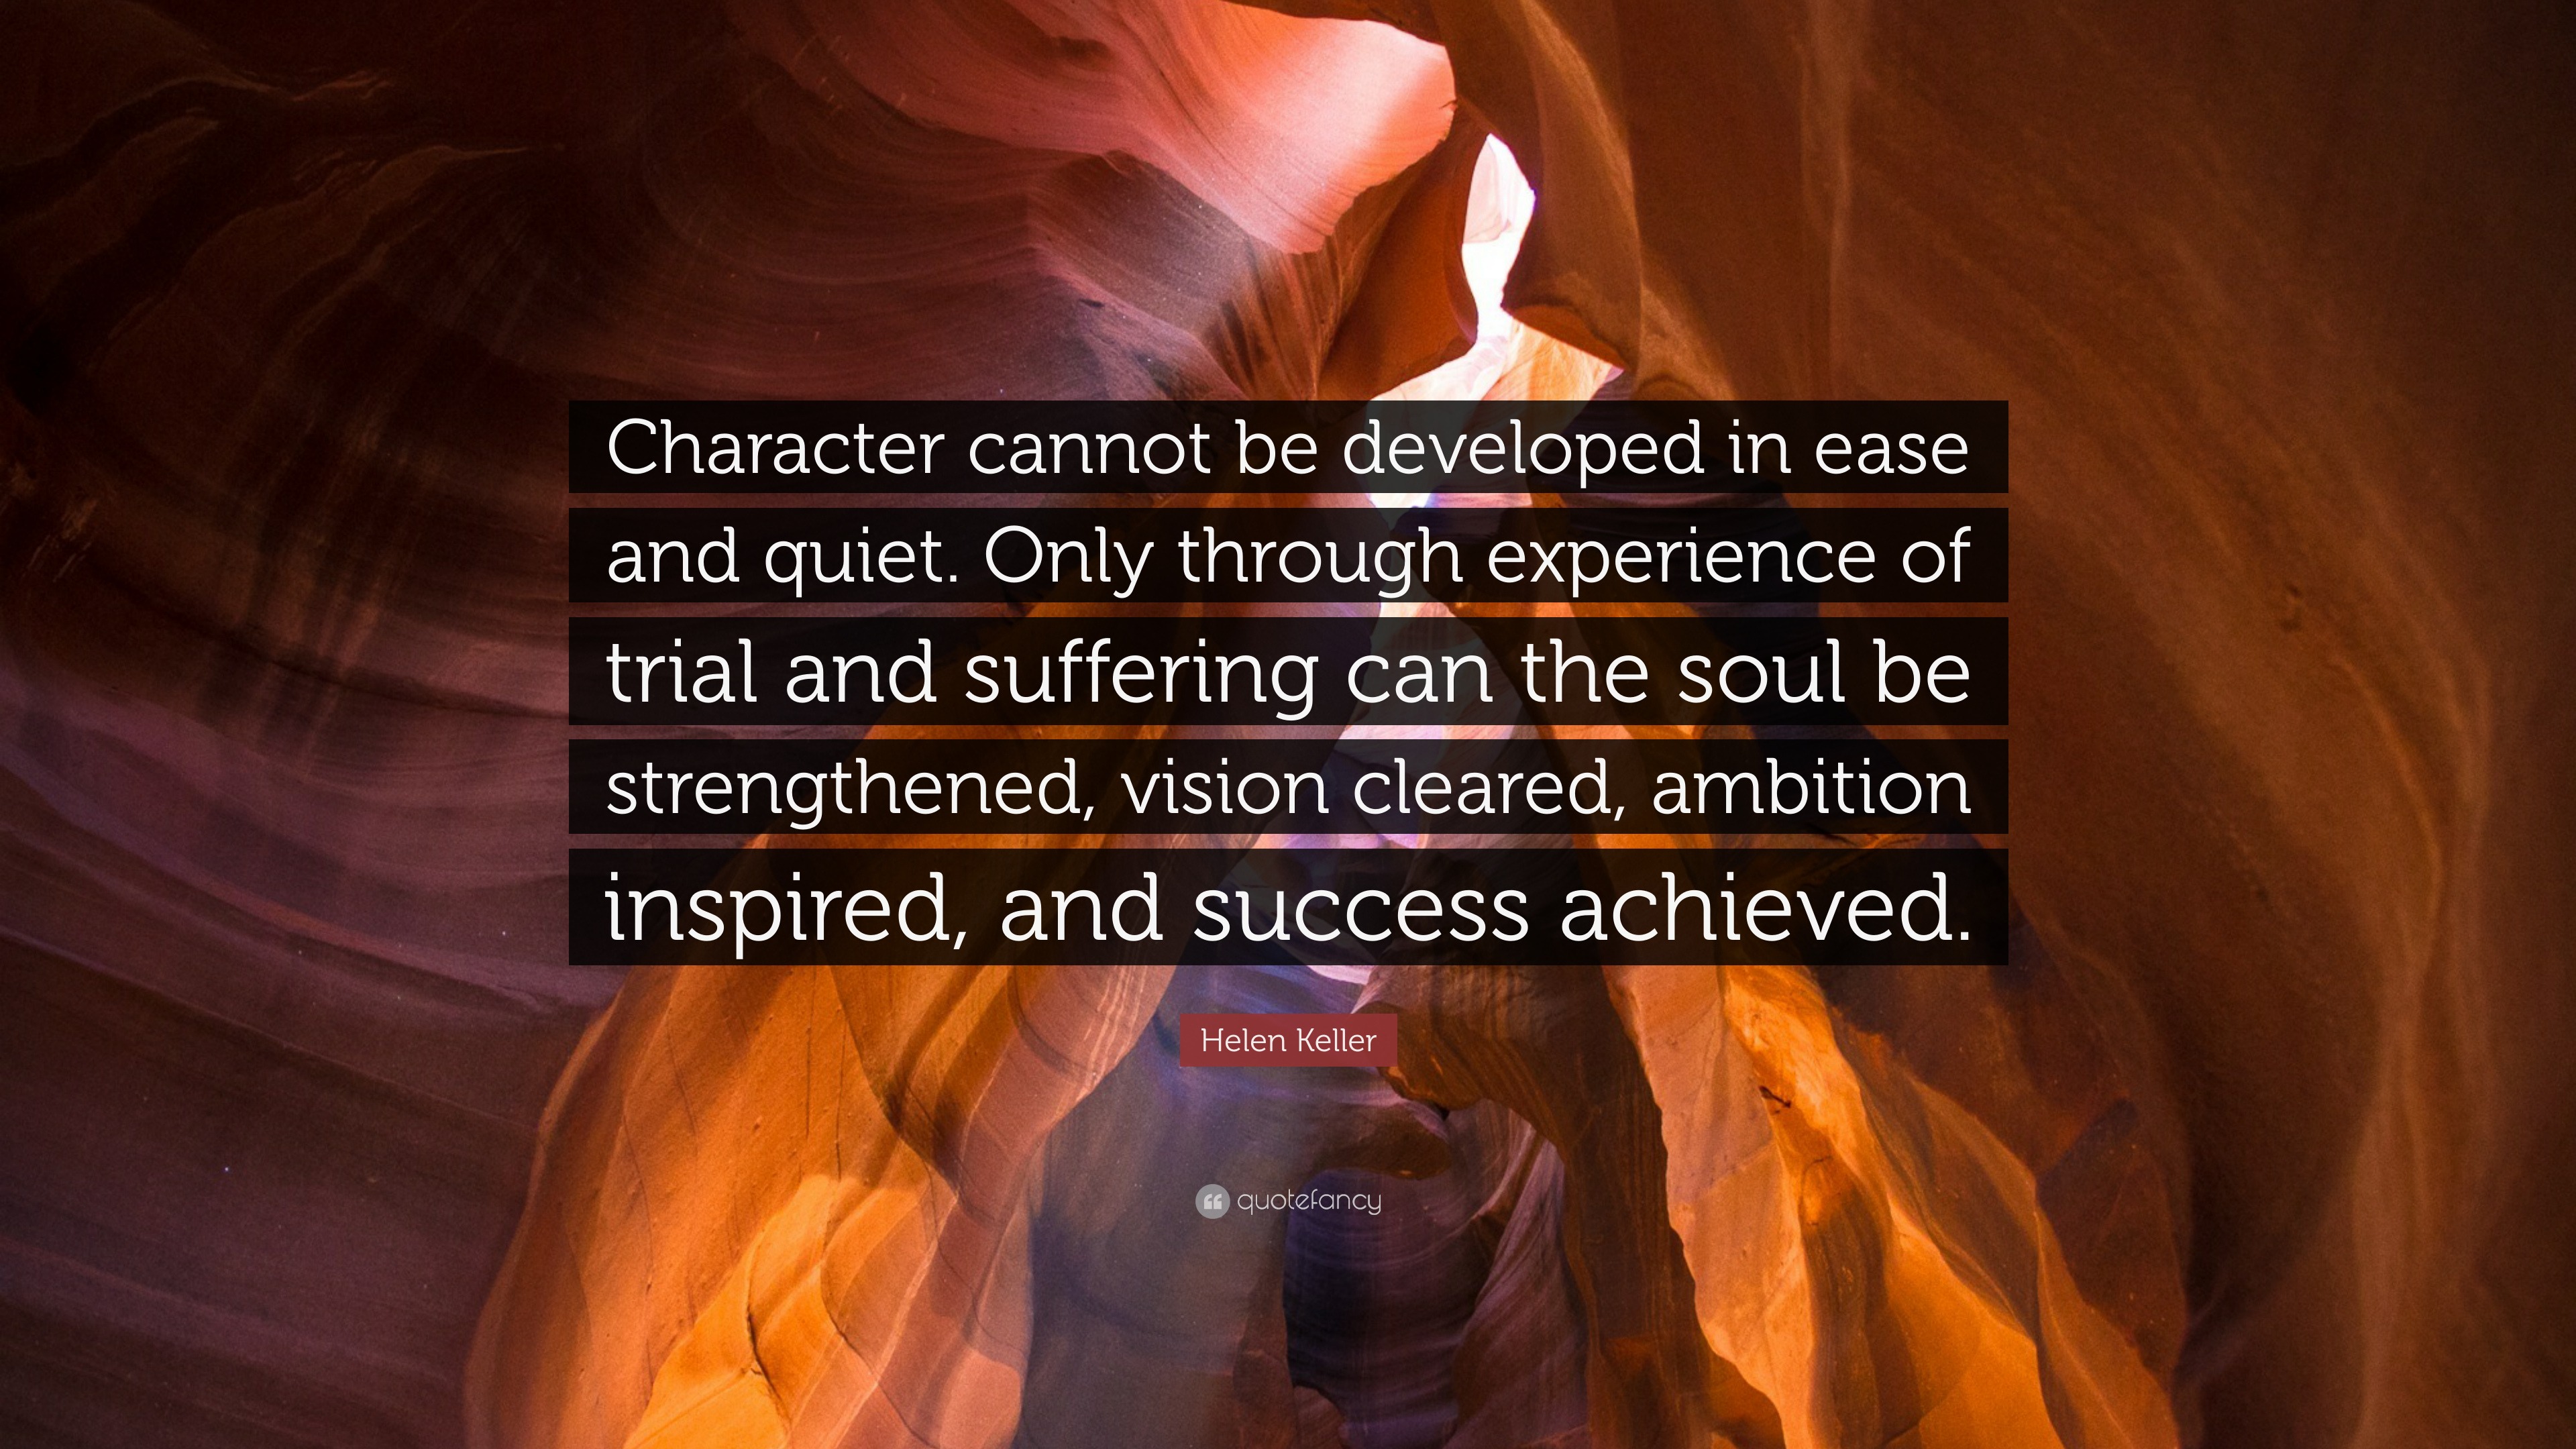 Helen Keller Quote: “Character cannot be developed in ease and quiet